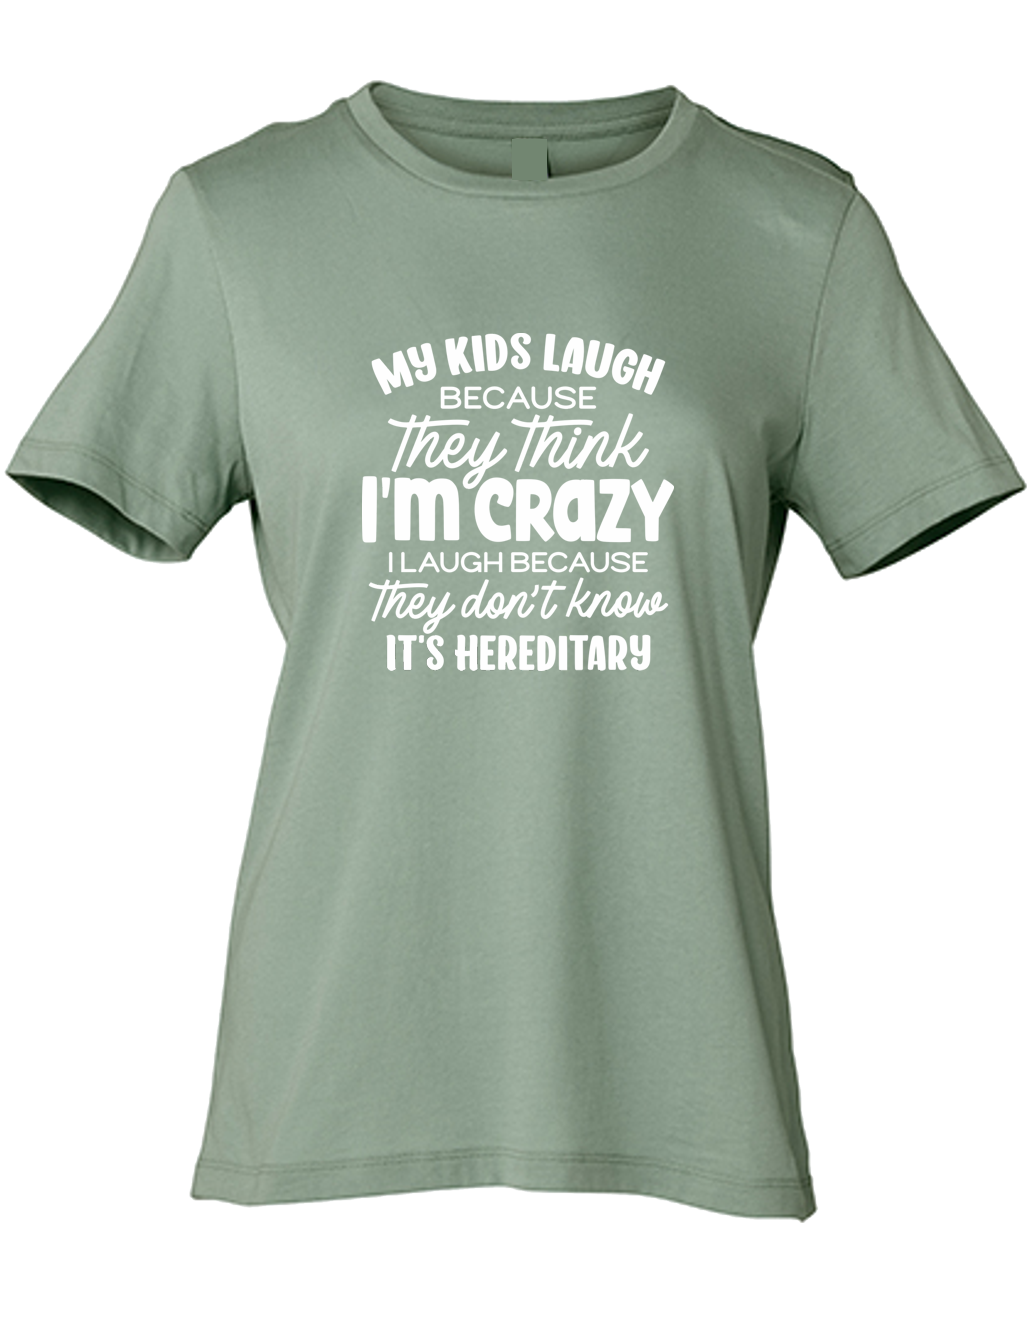 My kids laugh becouse